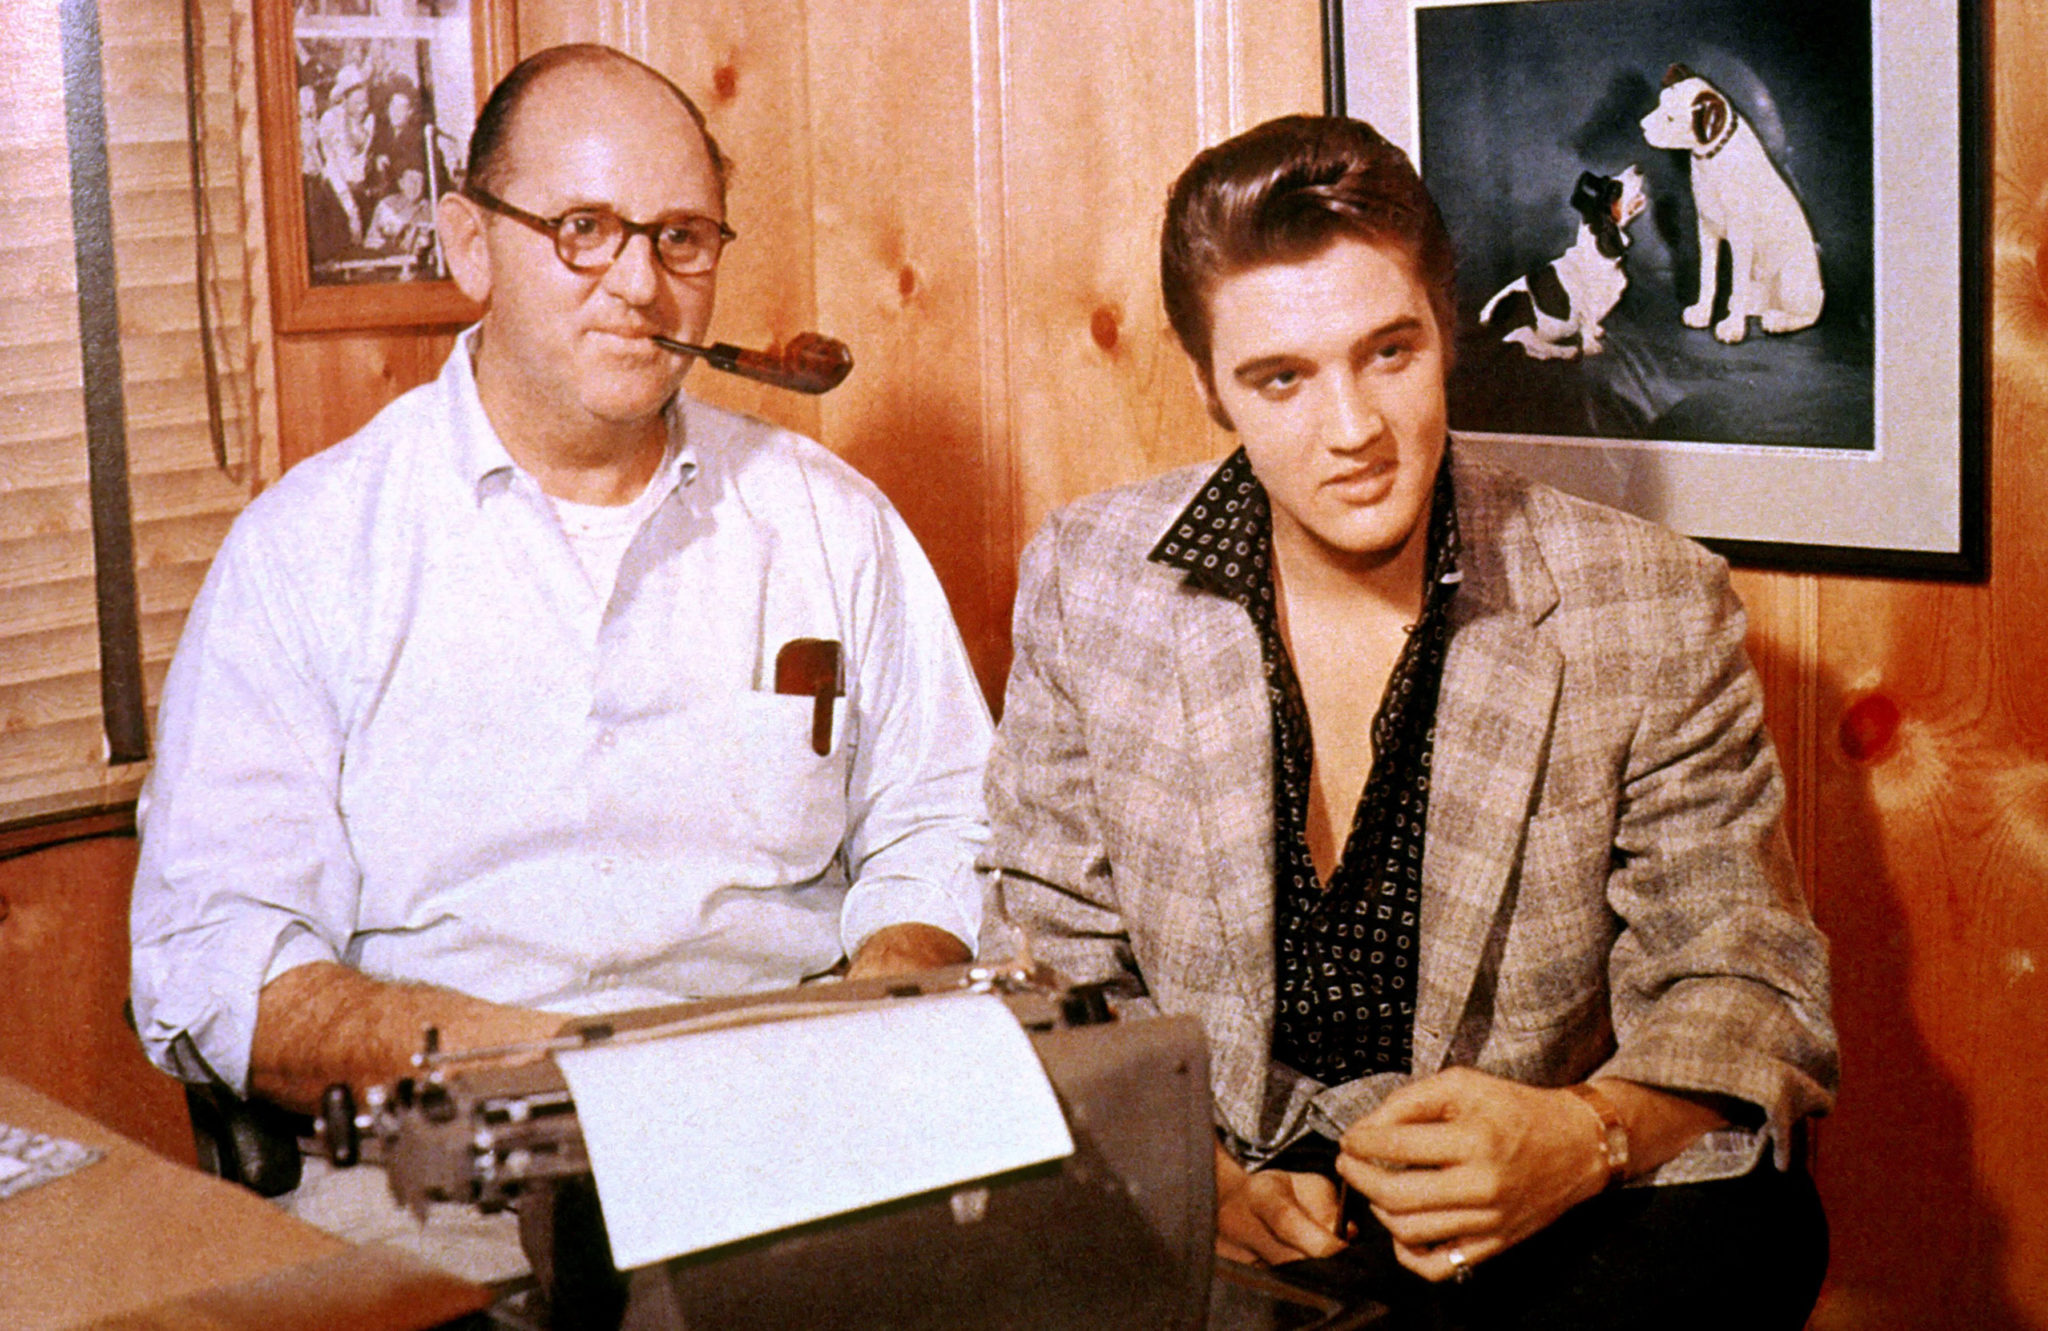 Colonel Tom Parker and Elvis Presley in October 1955 signing a record contract with RCA Victor. *** USA ONLY *** © Glenn A. Baker / Redferns / Retna Ltd.